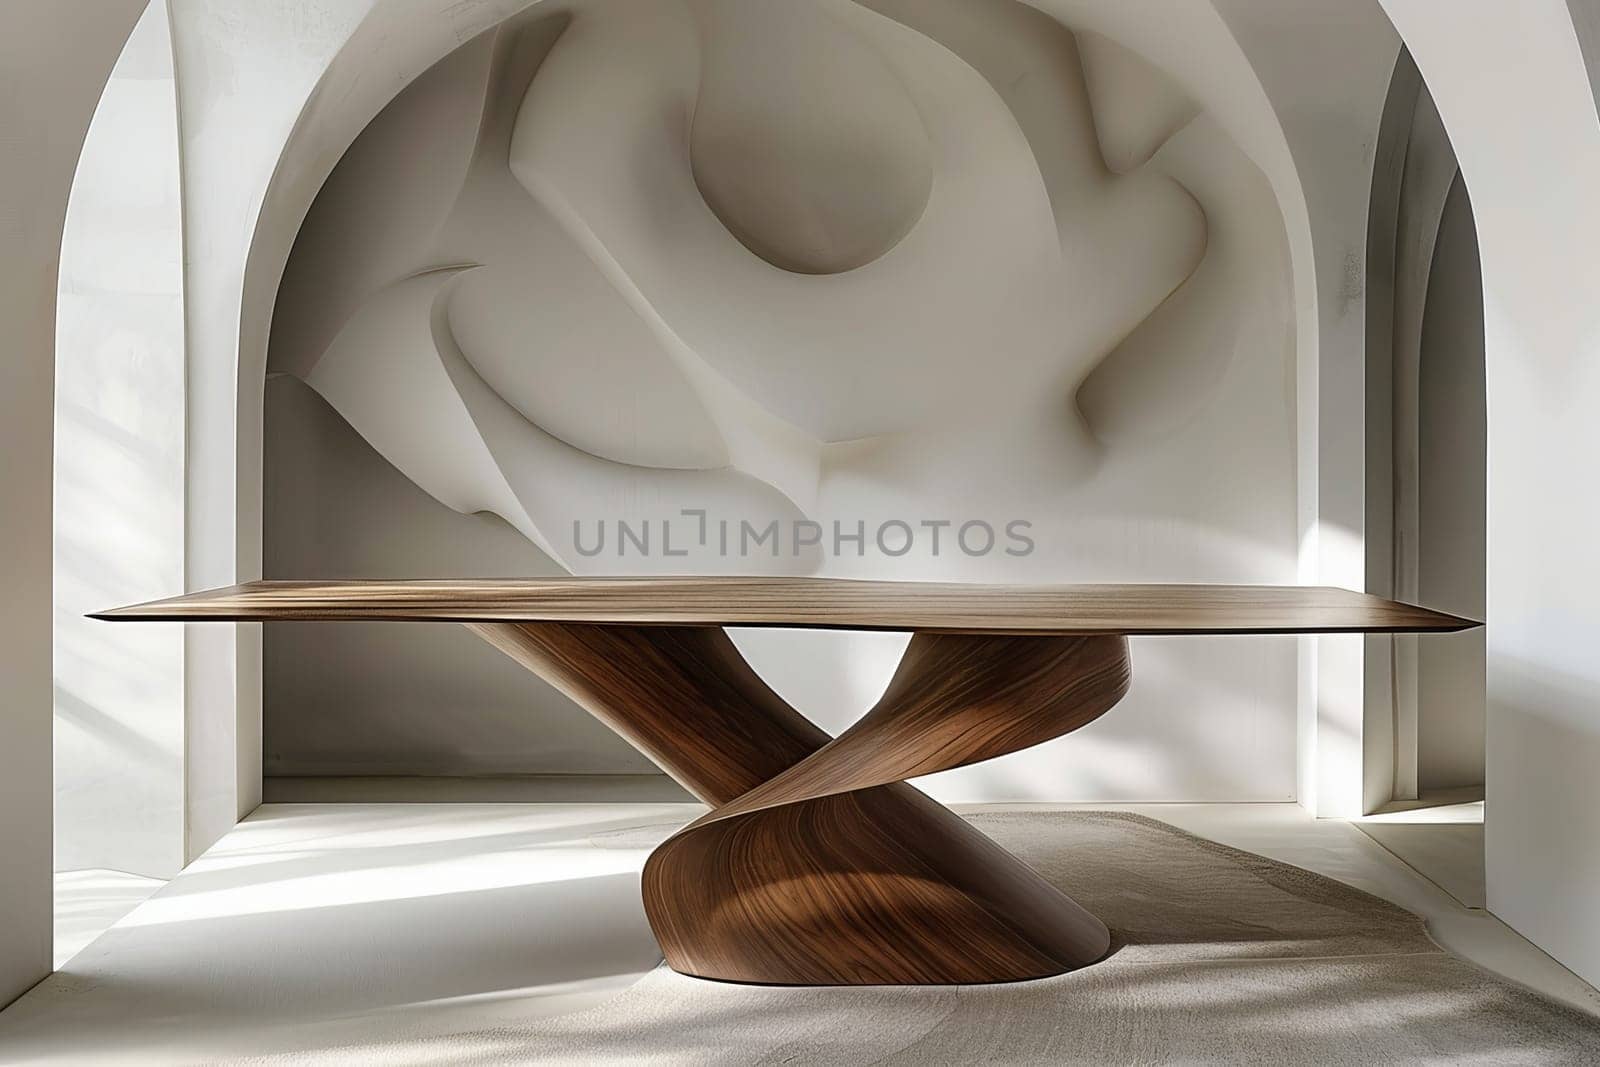 A wooden table with a spiral design sits in a room with white walls by itchaznong